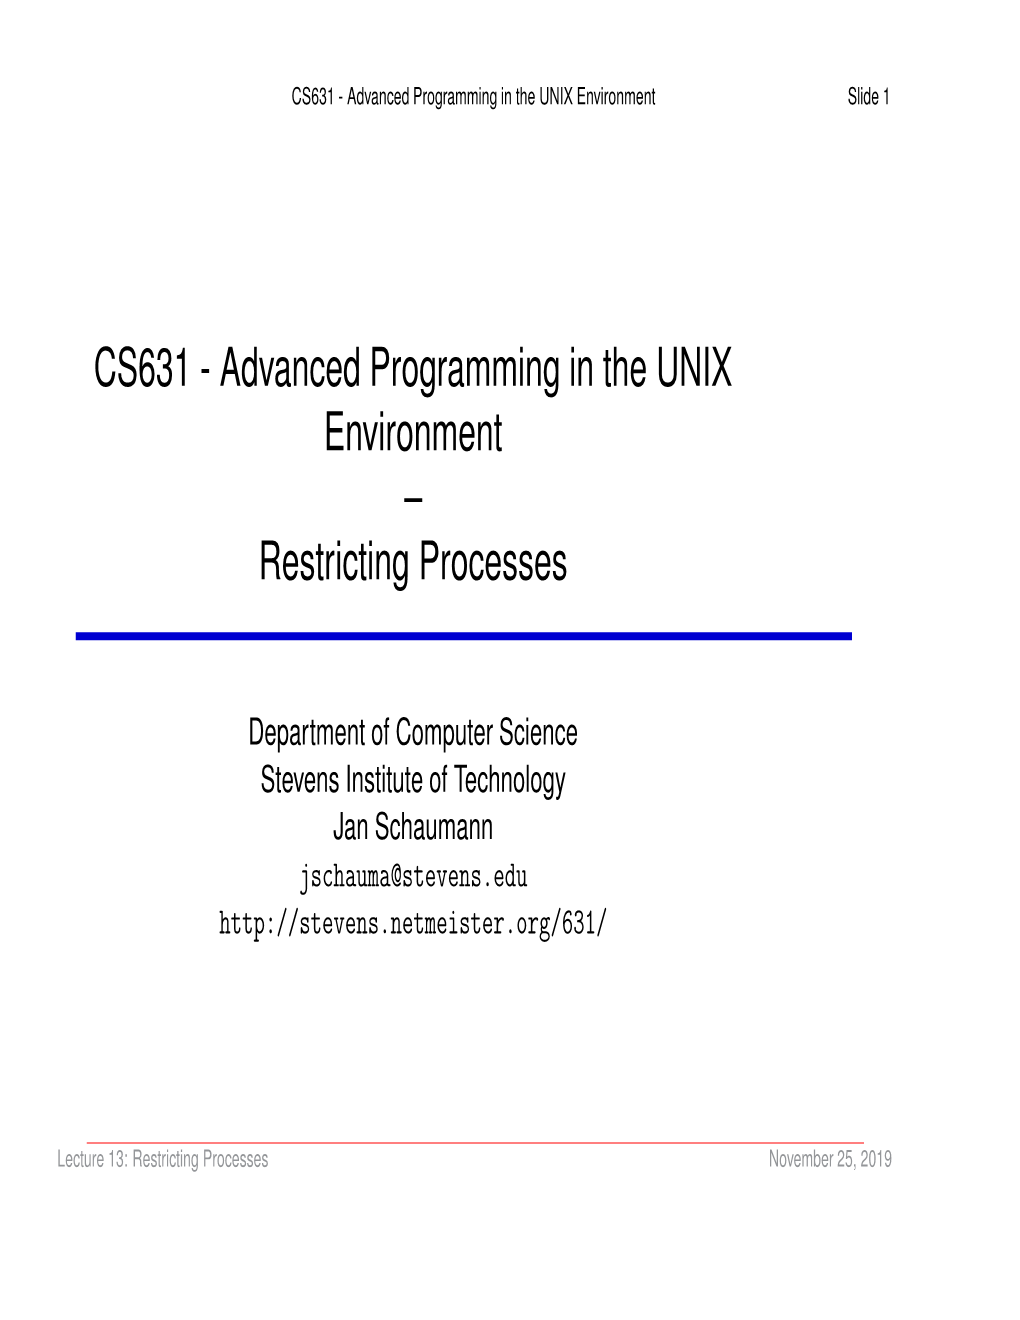 Advanced Programming in the UNIX Environment – Restricting Processes